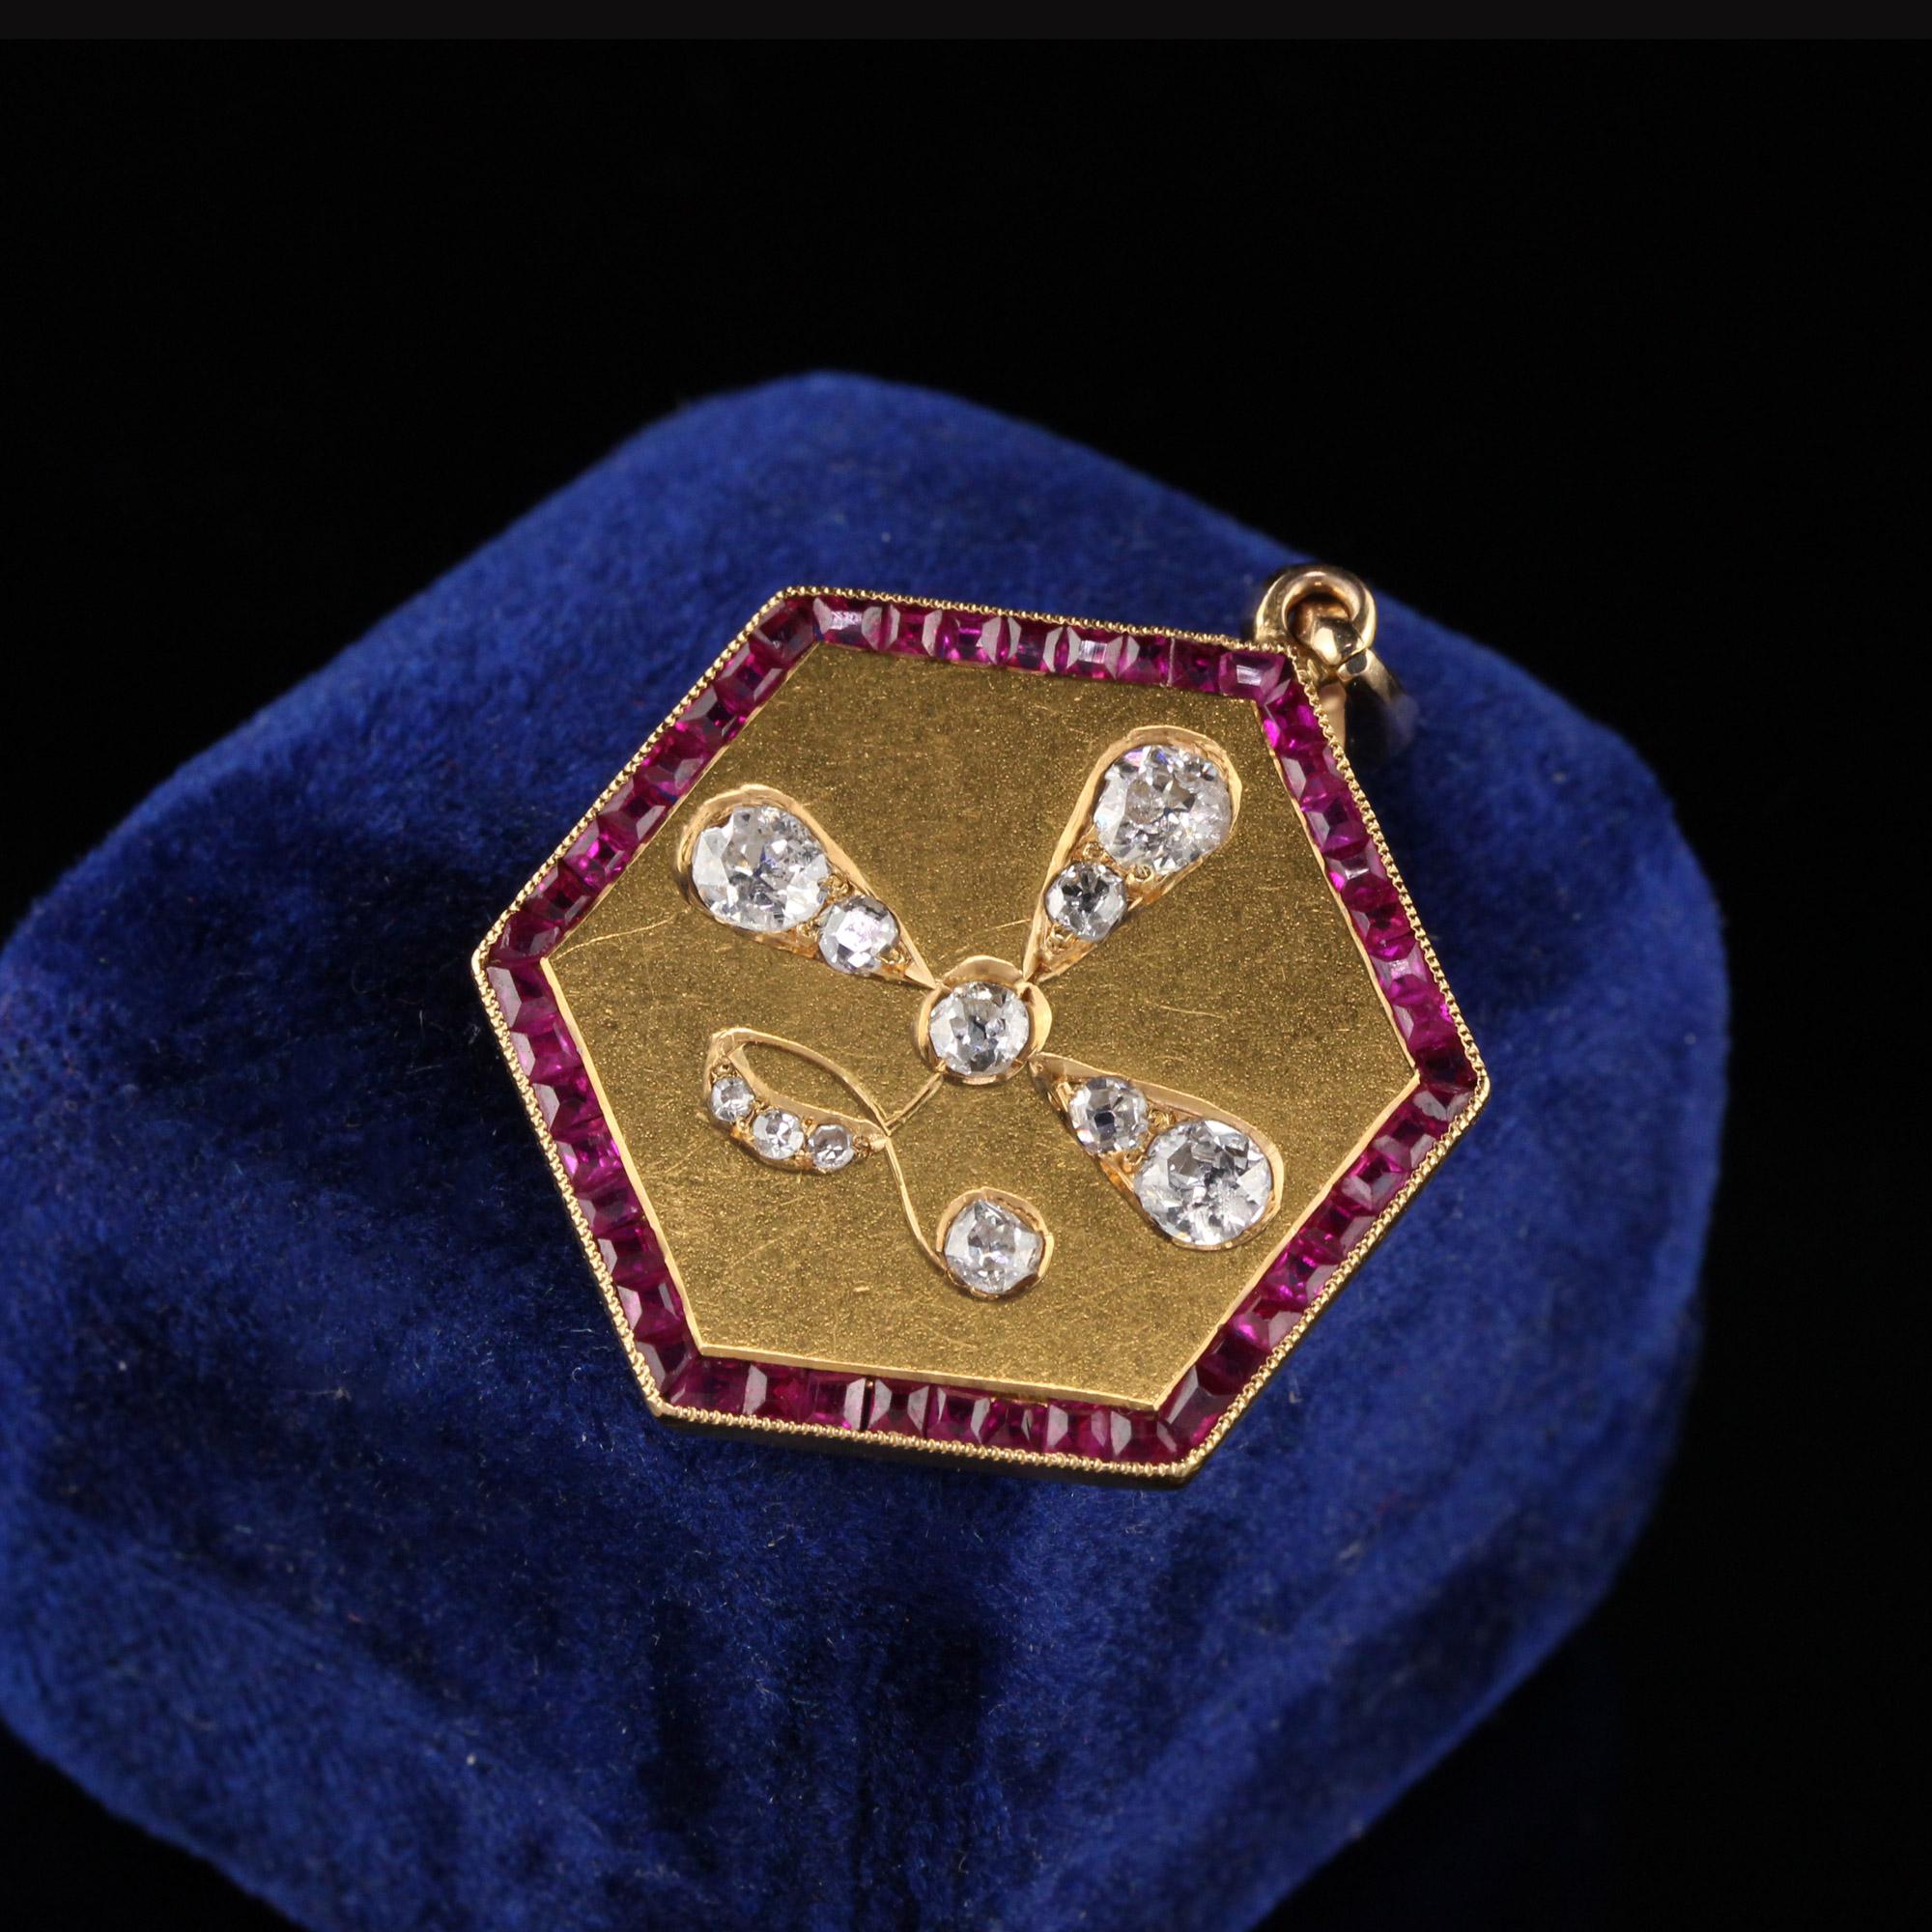 Beautiful antique pendant with rubies and old cut diamonds. 

Item #N0035

Metal: 14K Yellow Gold

Weight: 10 Grams

Total Diamond Weight: Approximately 1.00 cts

Diamond Color: H

Diamond Clarity: VS2

Measurements: 40.7 mm x 2.05 mm